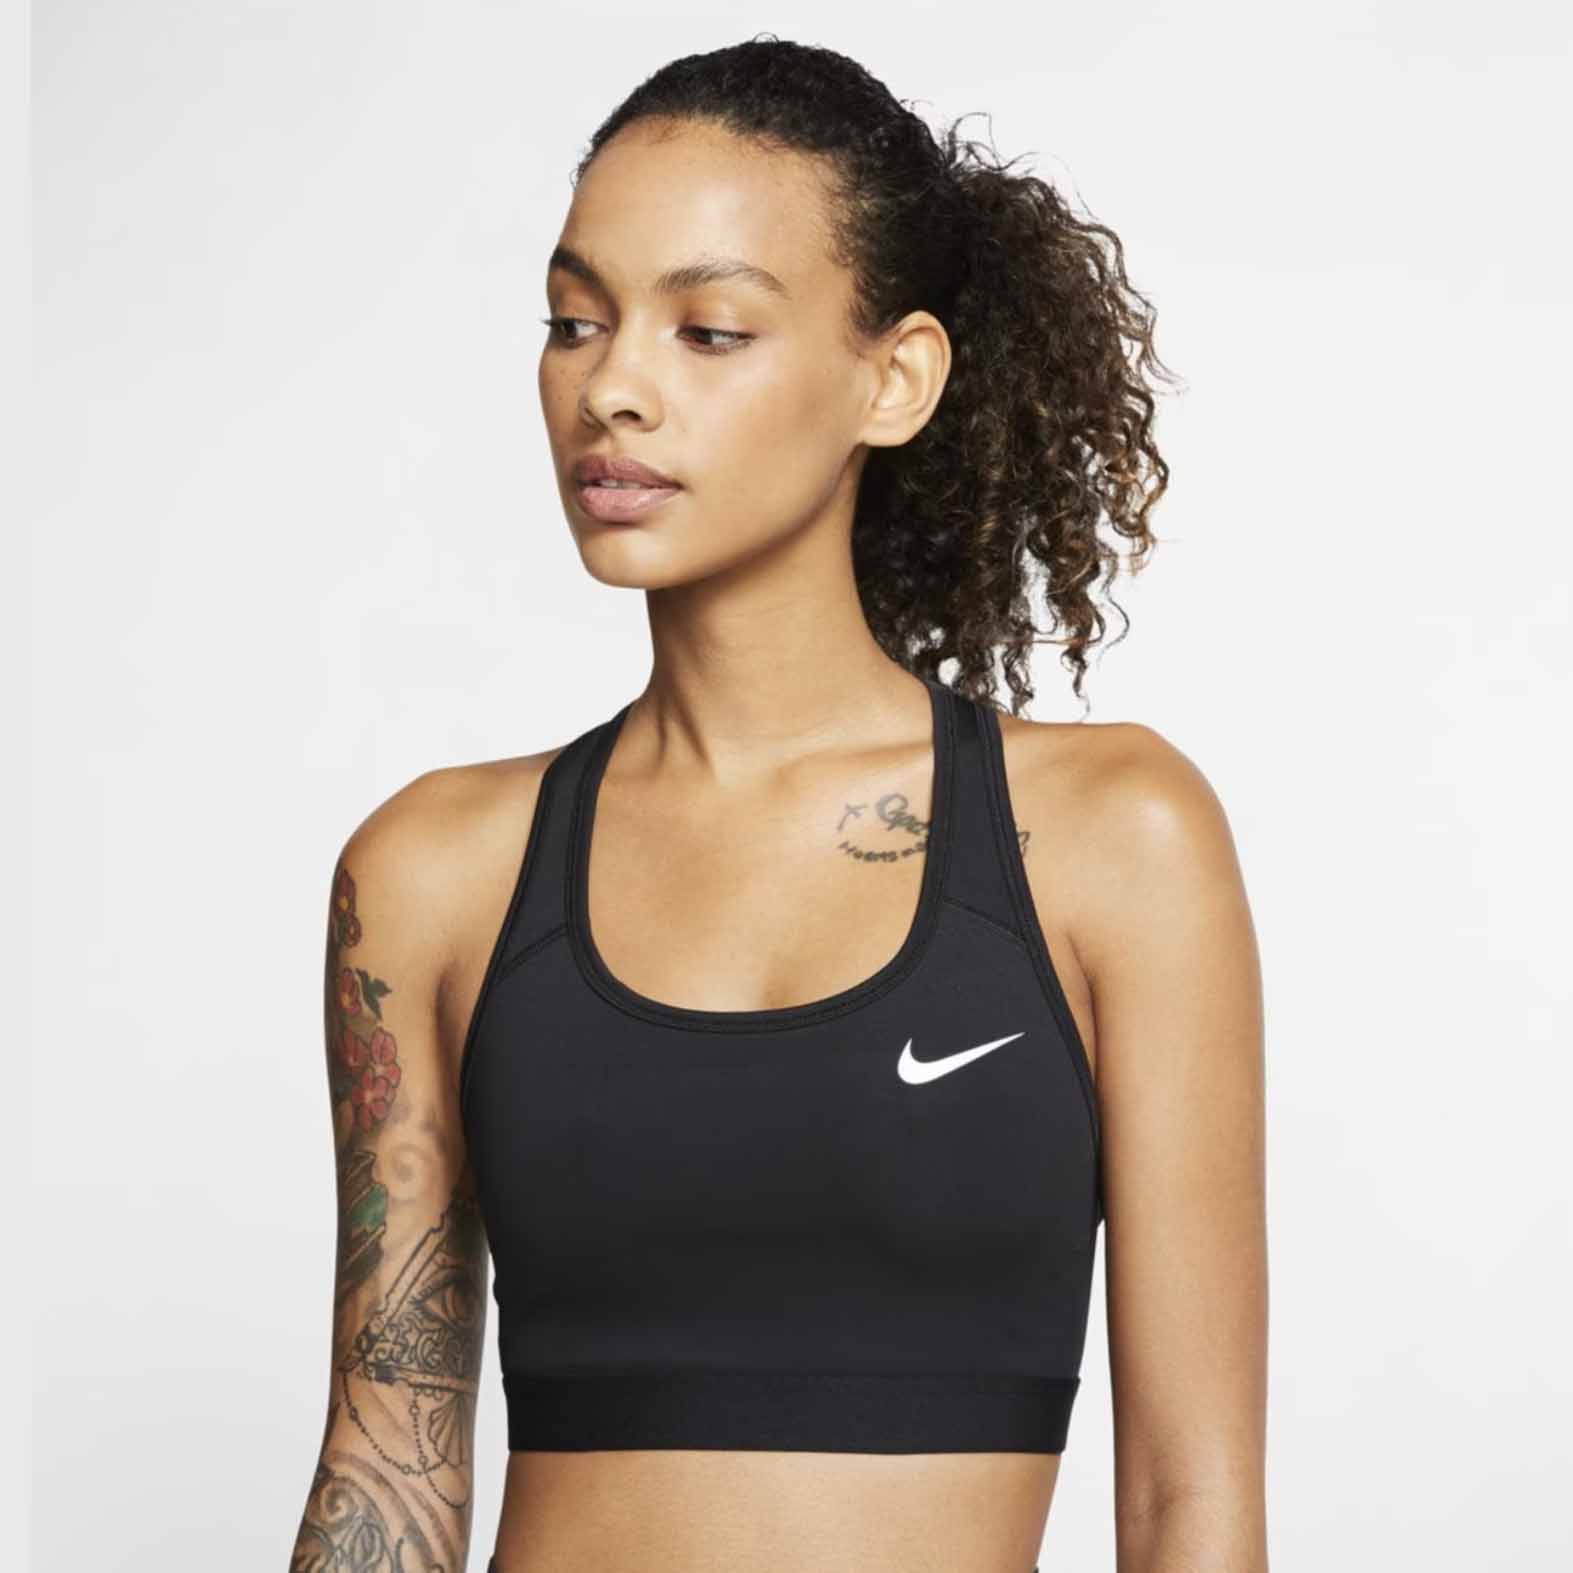 Fashionable Ladies Bralette Padded Crop Top Running Work out Sport